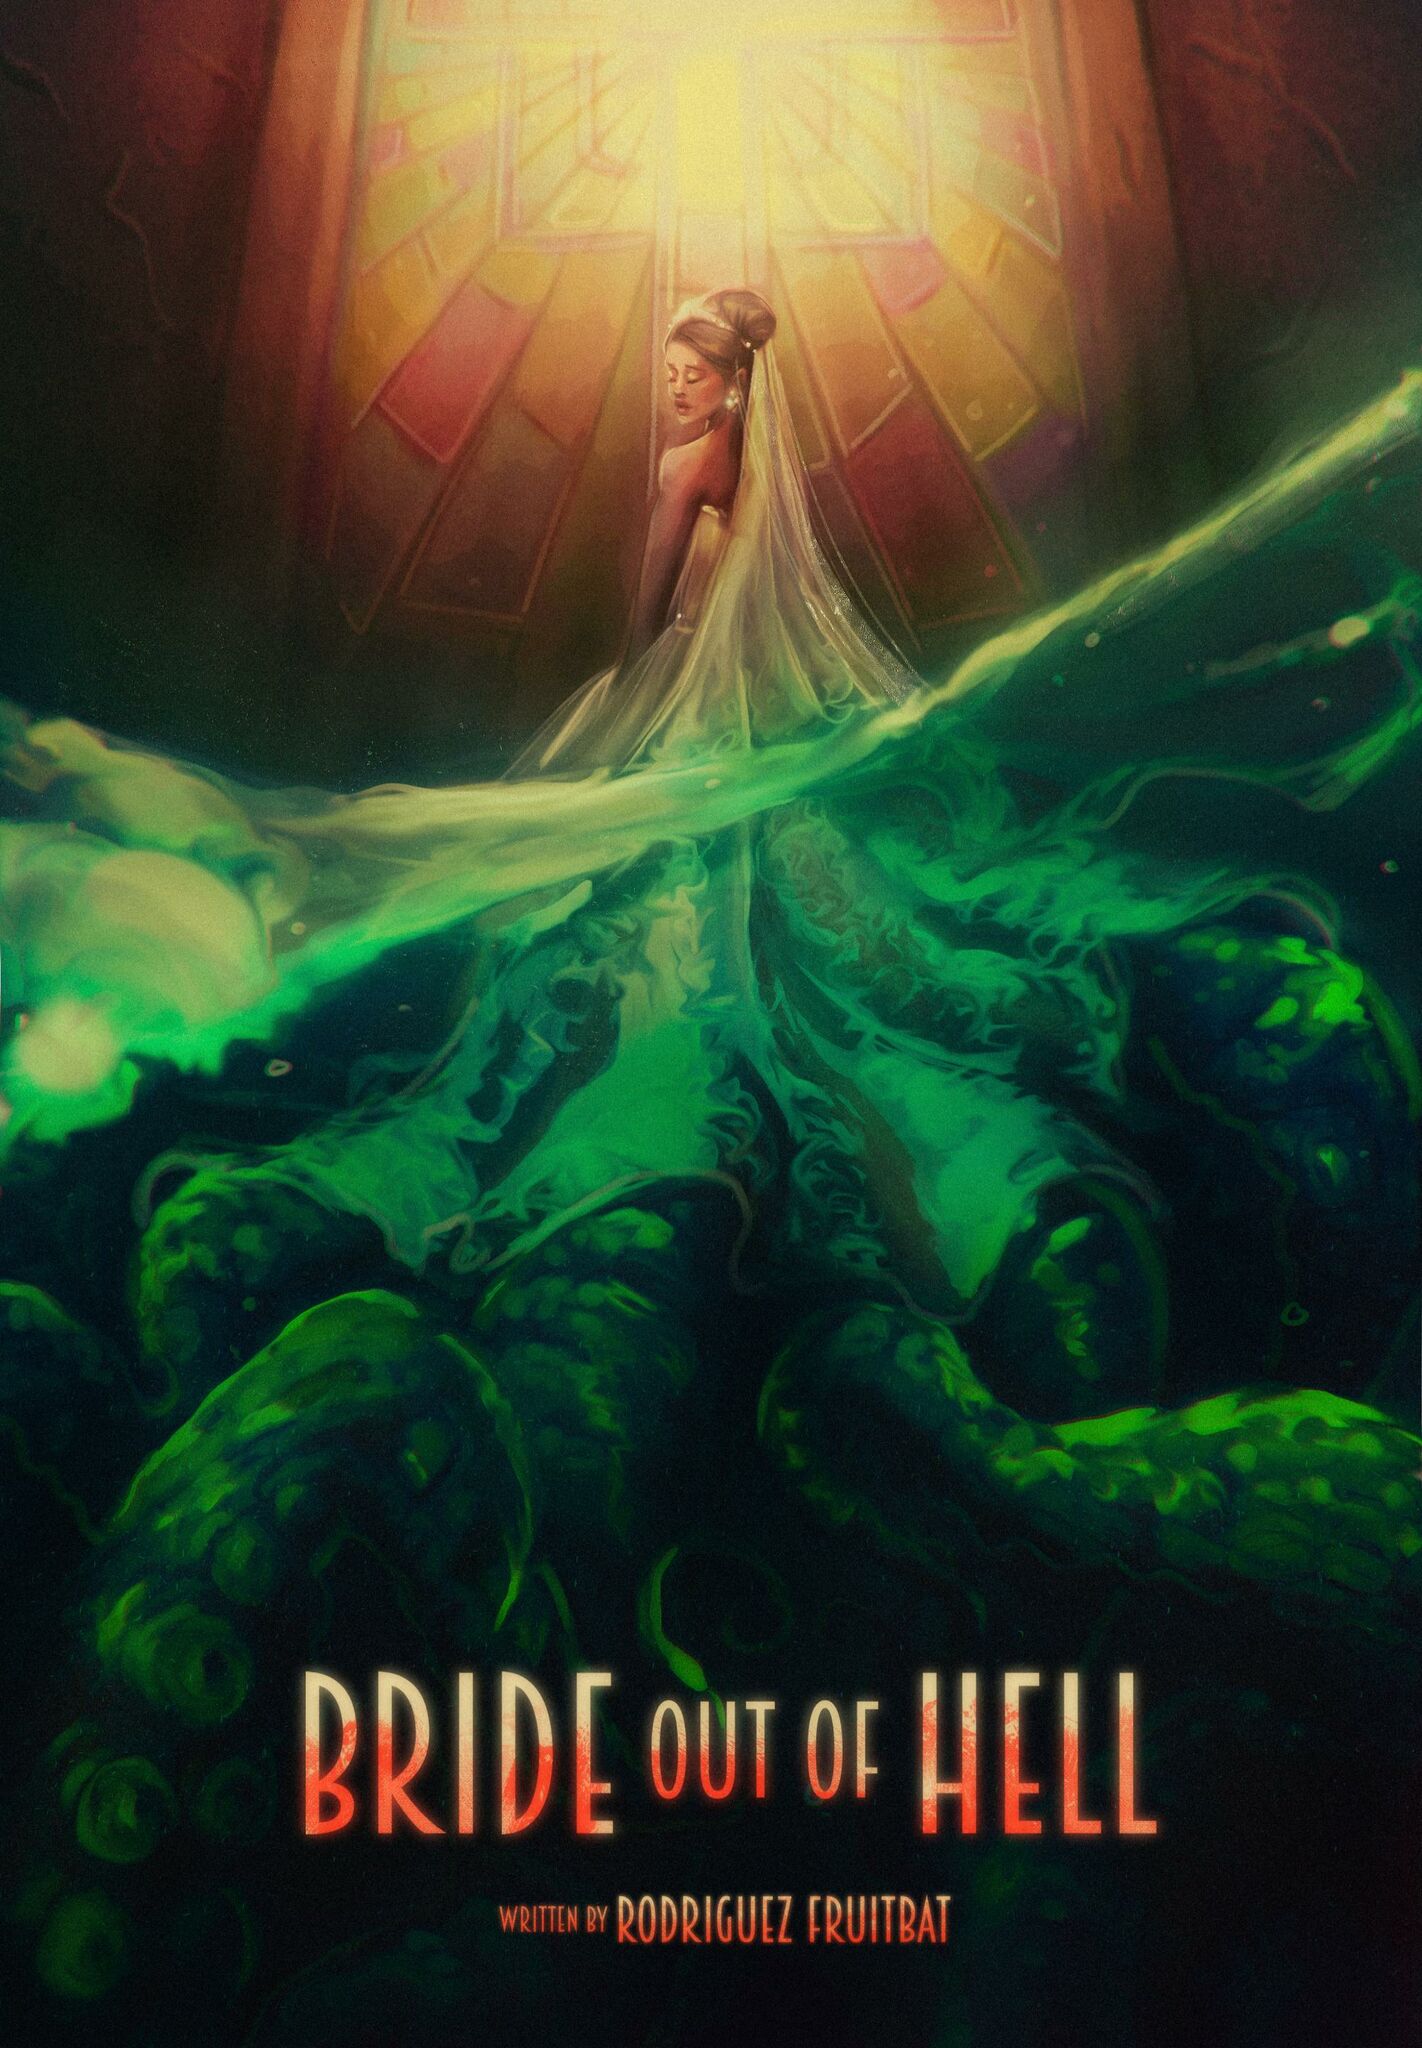 BRIDE OUT OF HELL